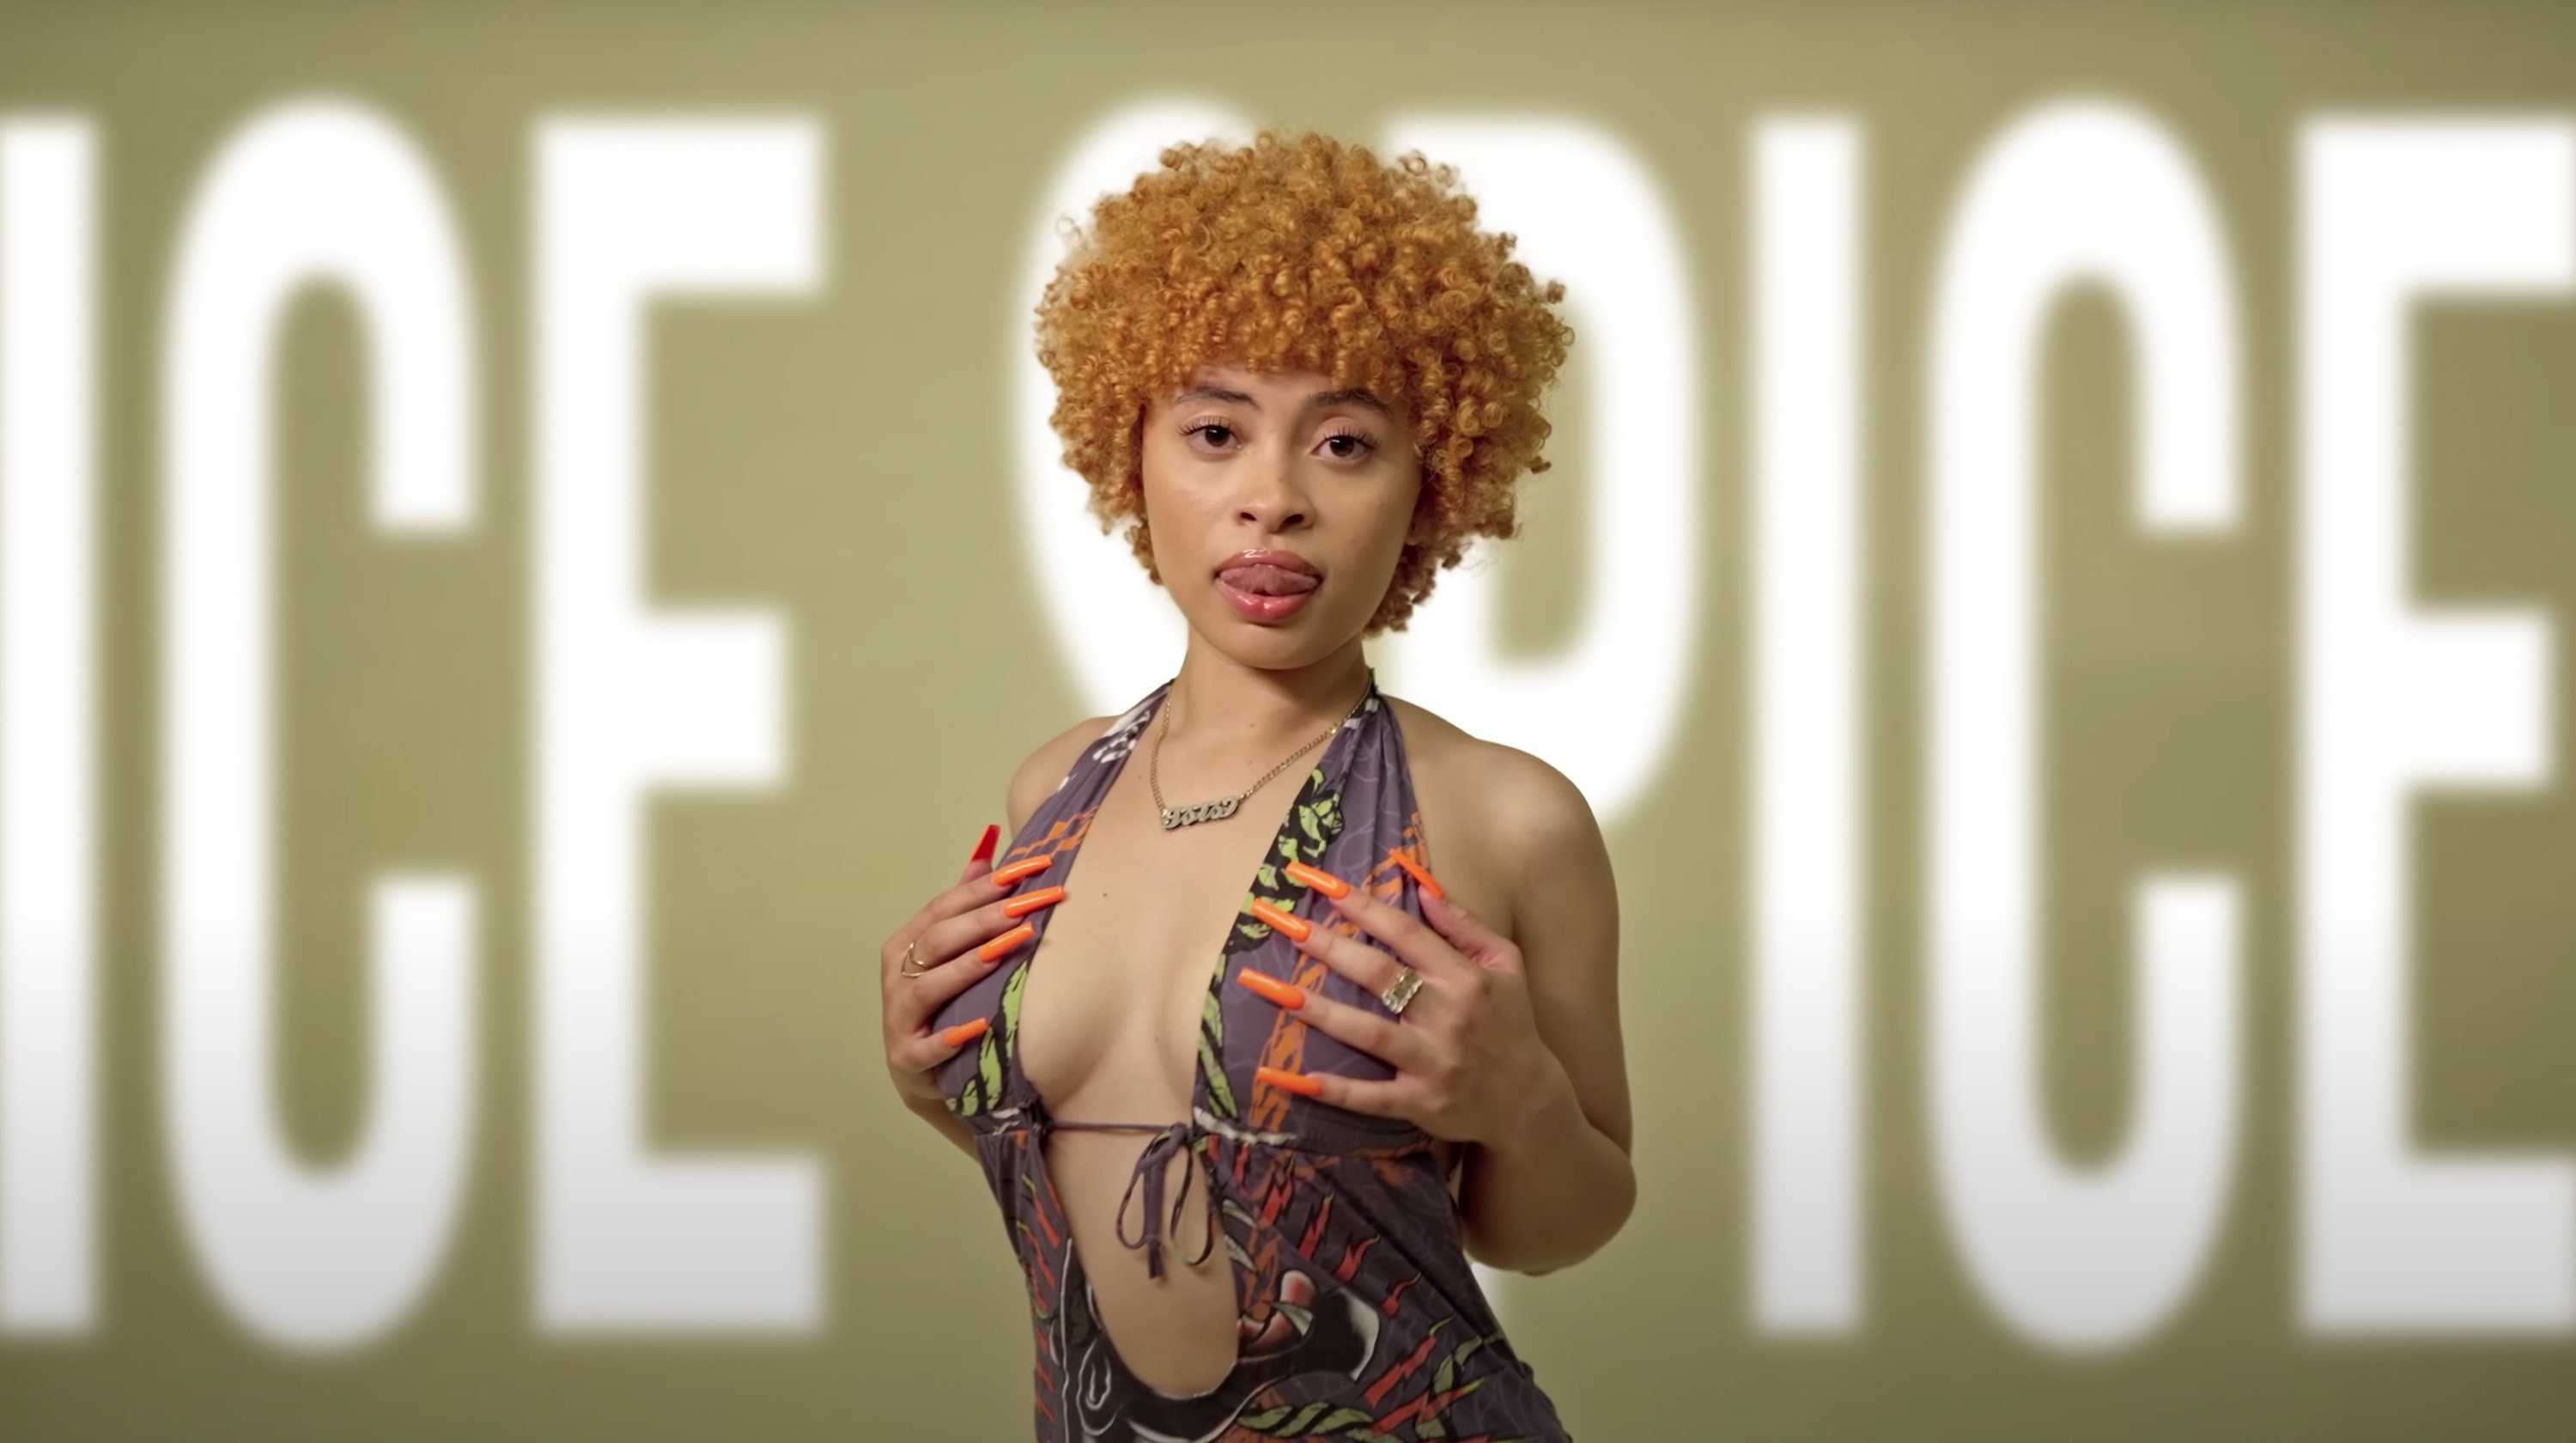 A woman with an afro and a colorful top stands in front of the words 